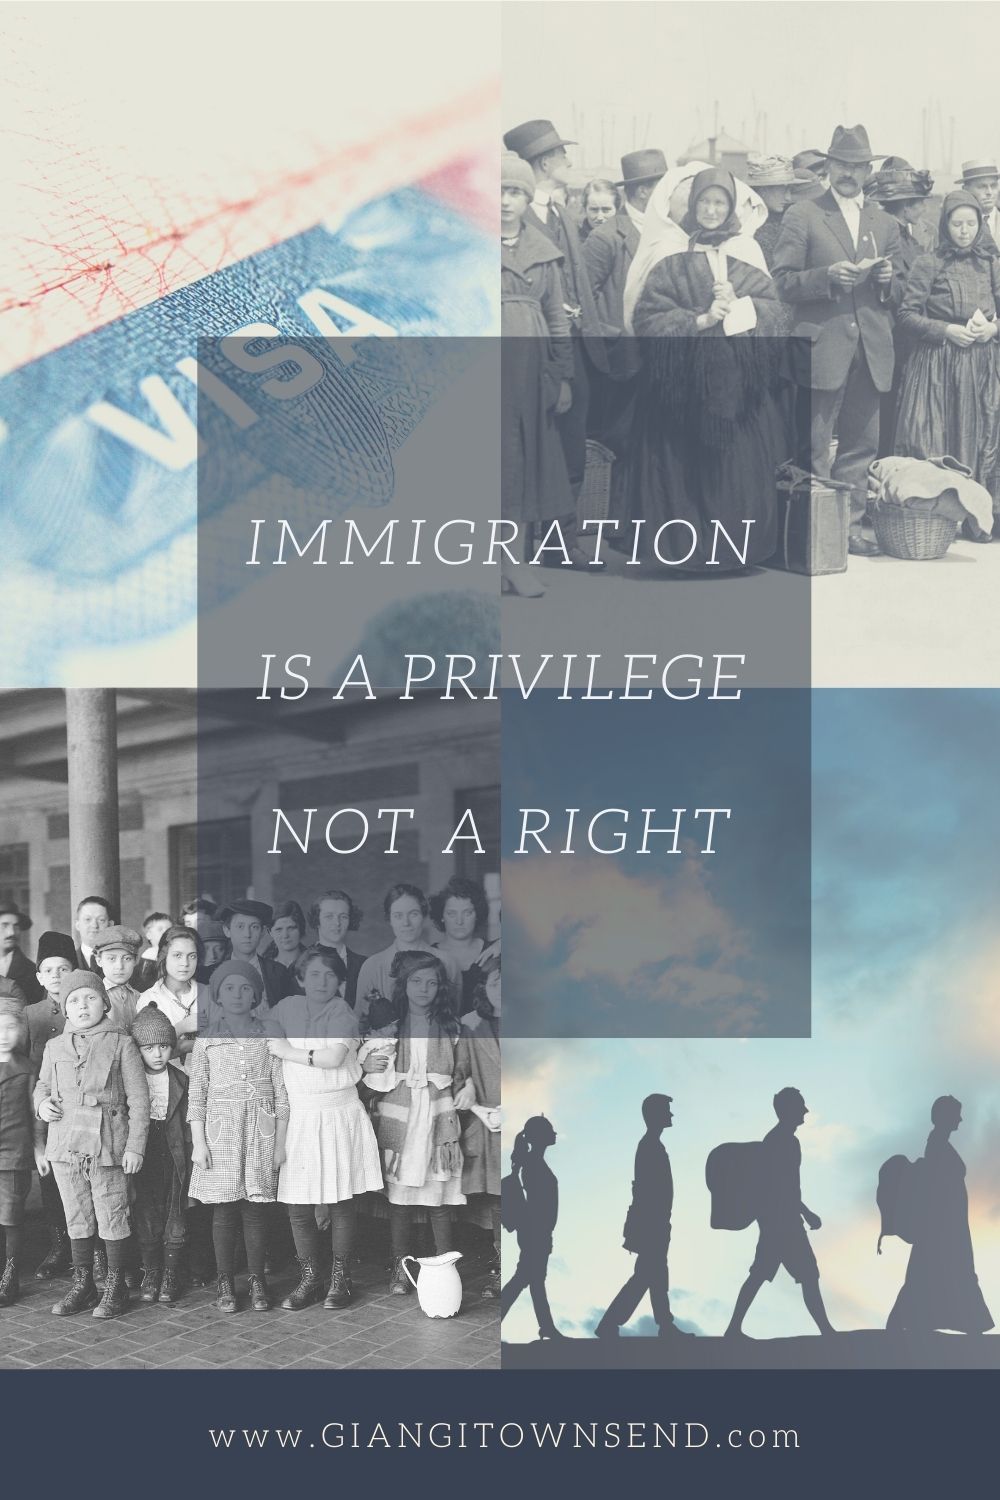 Immigration is a privilege, not a right.